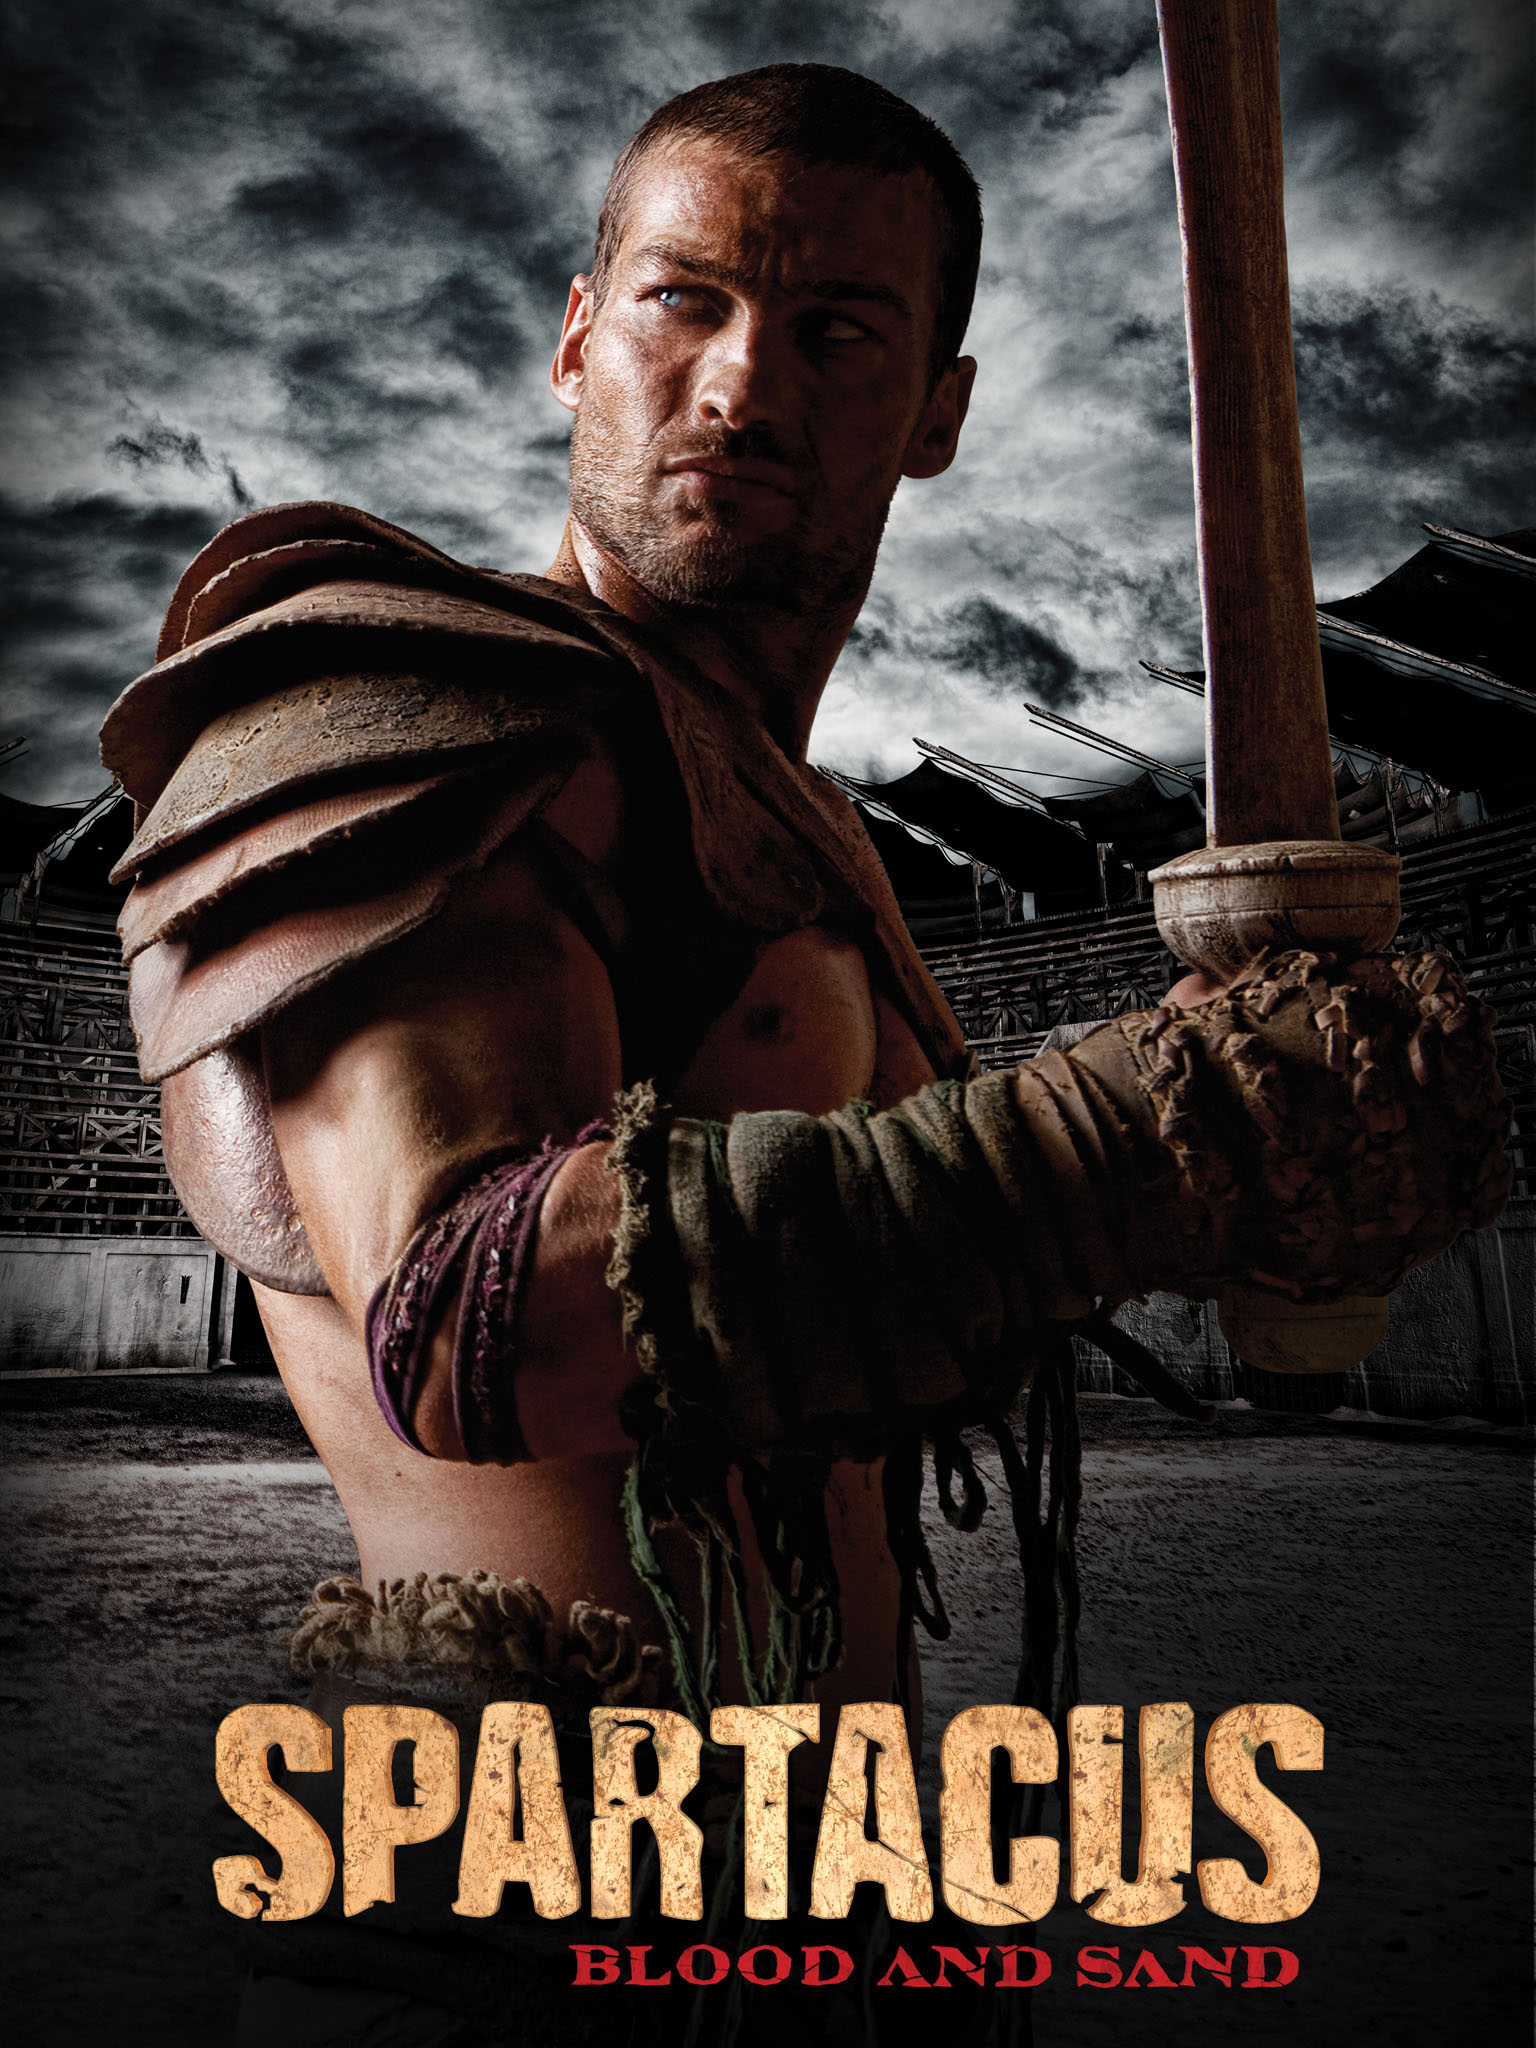 aashish goswami recommends where to watch spartacus for free pic